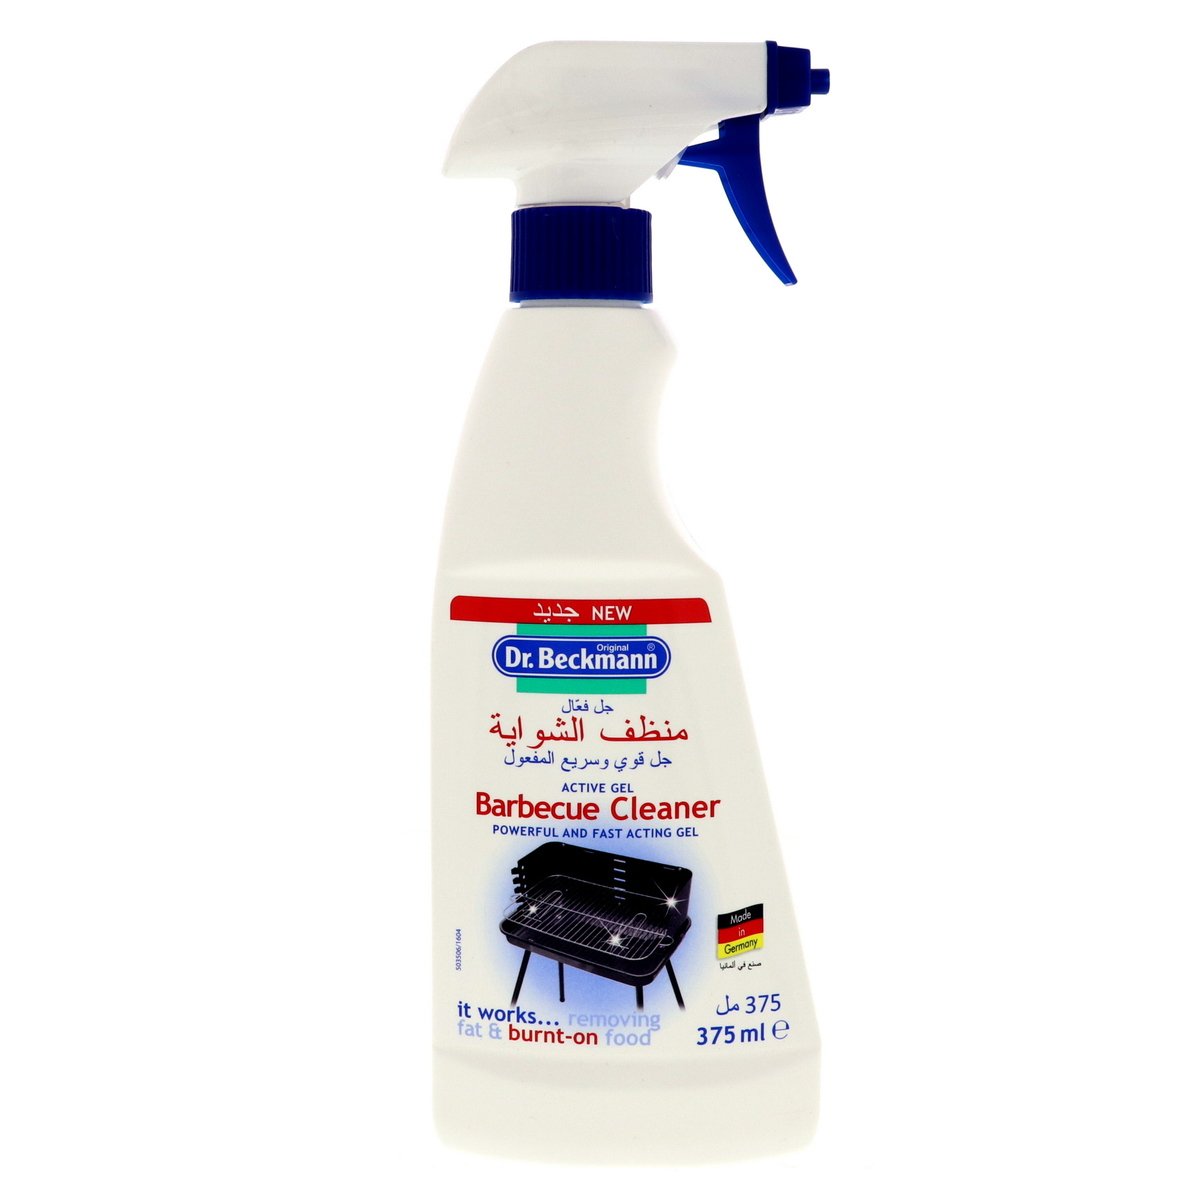 Dr. Beckmann Active Gel Barbecue Cleaner 375ml